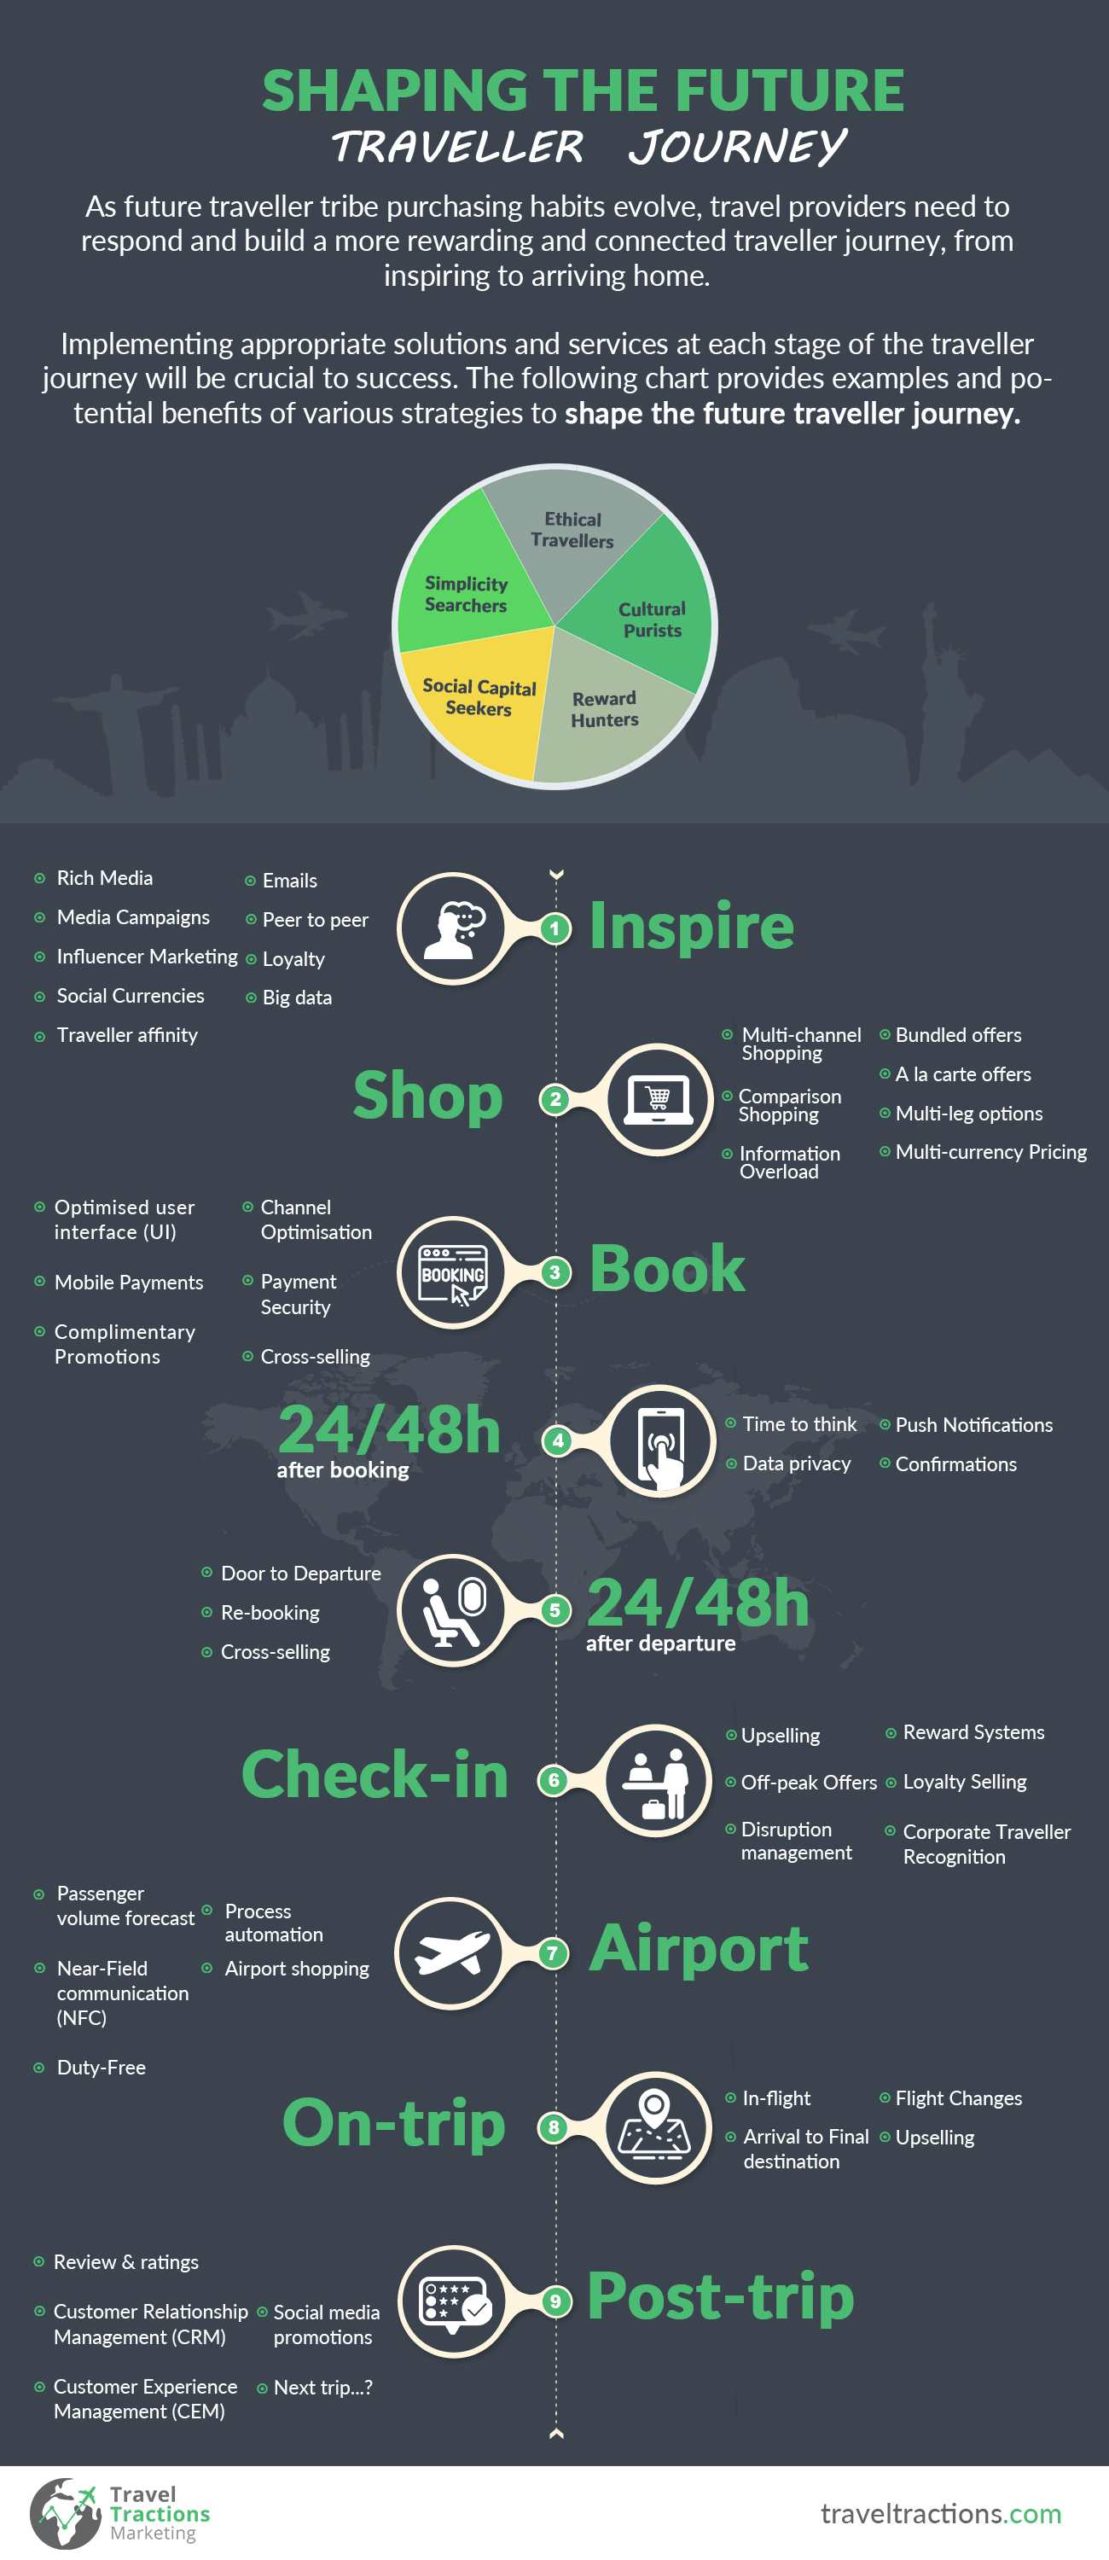  Travel Journey Infographic reveal the phases of the client journey through buying to take a trip